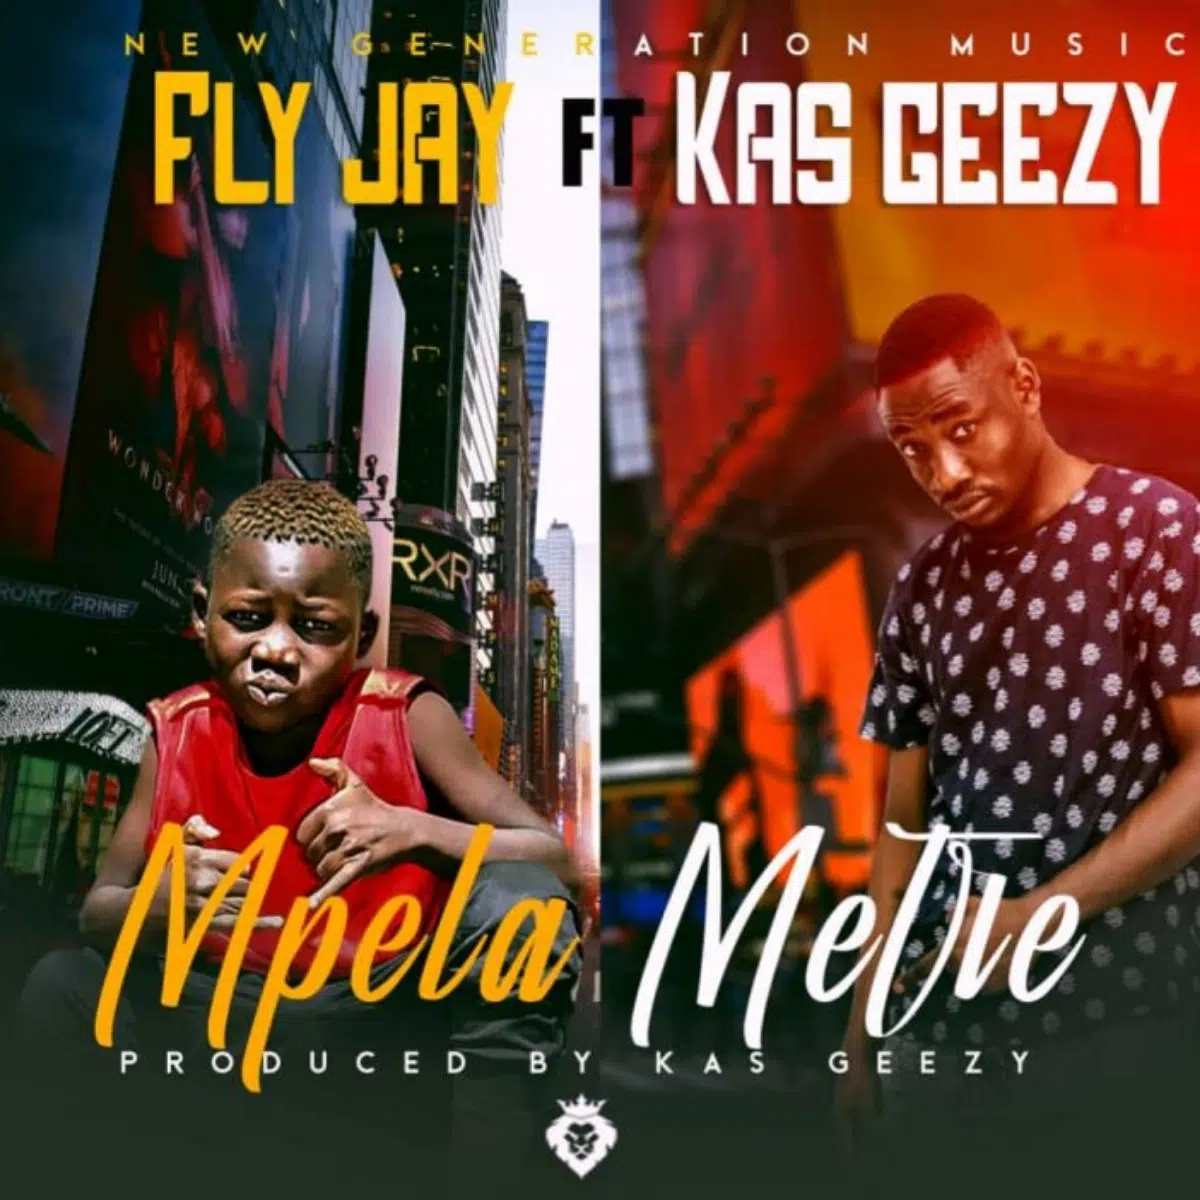 DOWNLOAD: Fly Jay Feat Kas Geezy – “Mpela Metre” Mp3